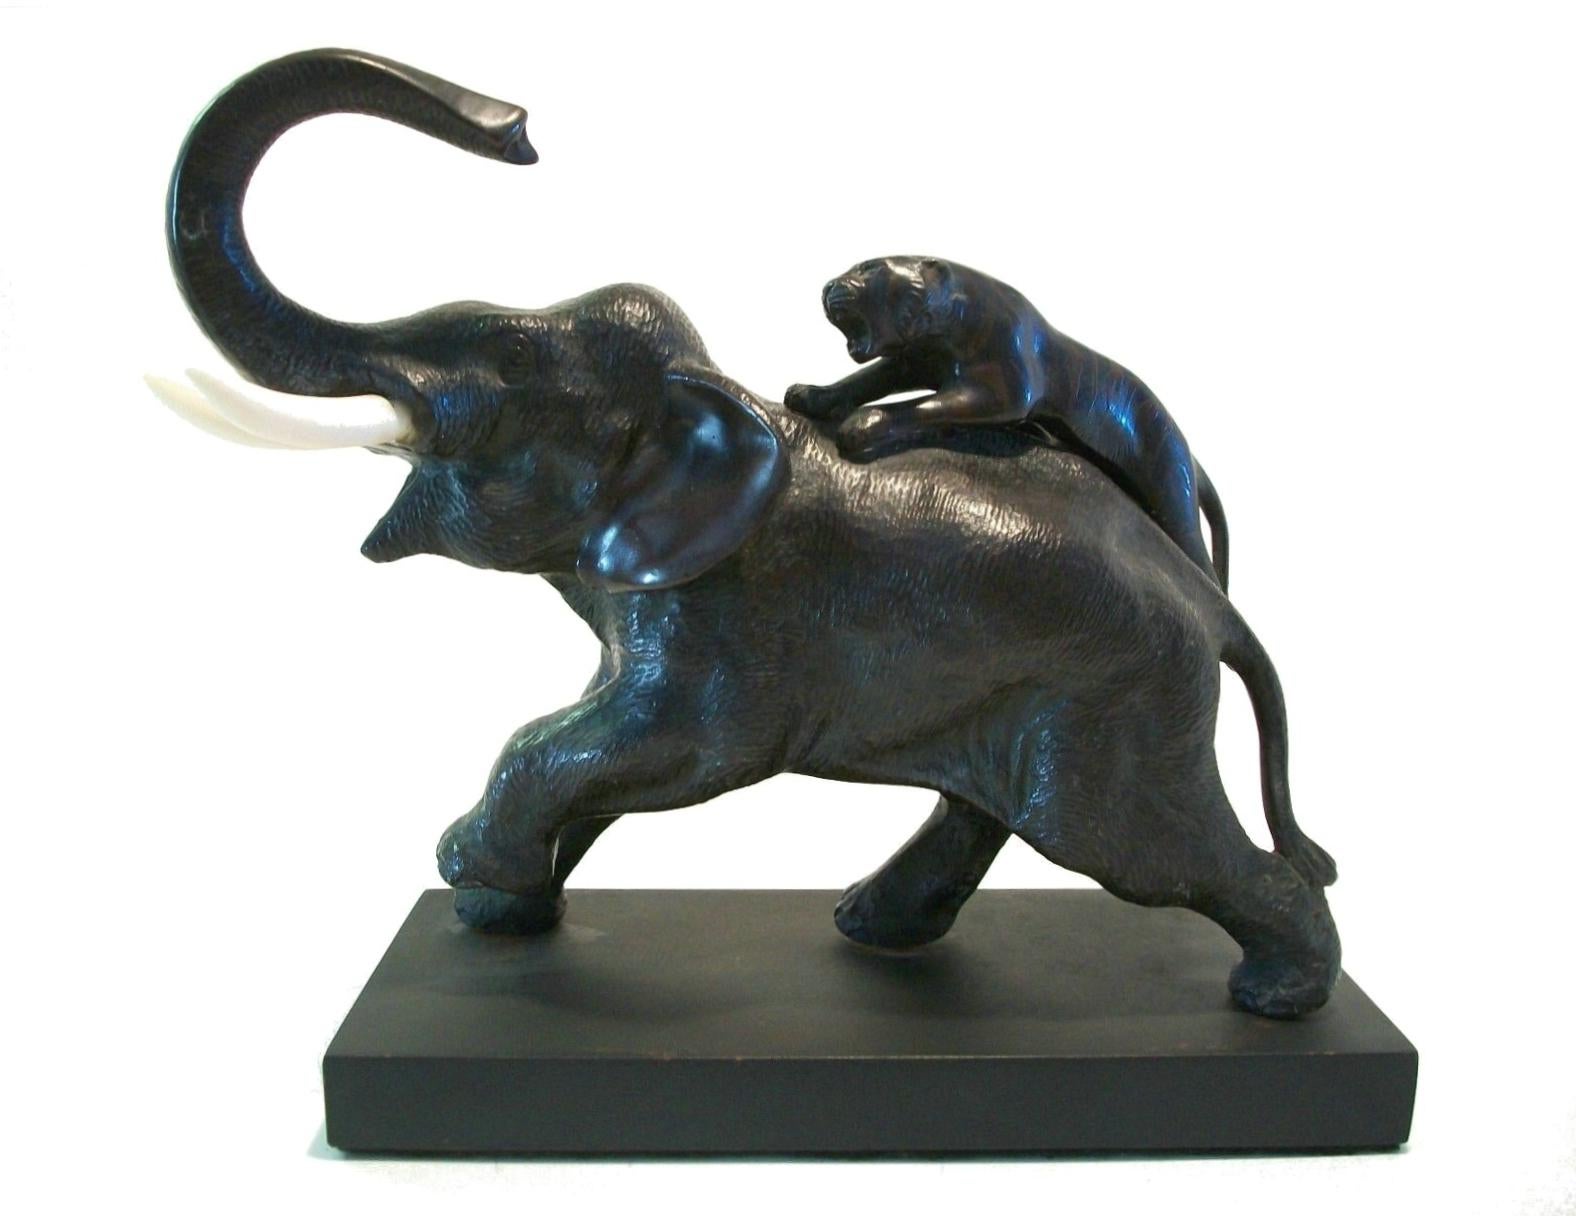 Antique Meiji Period bronze and bone sculpture - dramatic fine casting of an elephant and tiger - mounted to an black painted wood base - unsigned - Japan - late 19th century.

Excellent antique condition - replaced plinth/base with scuffs and